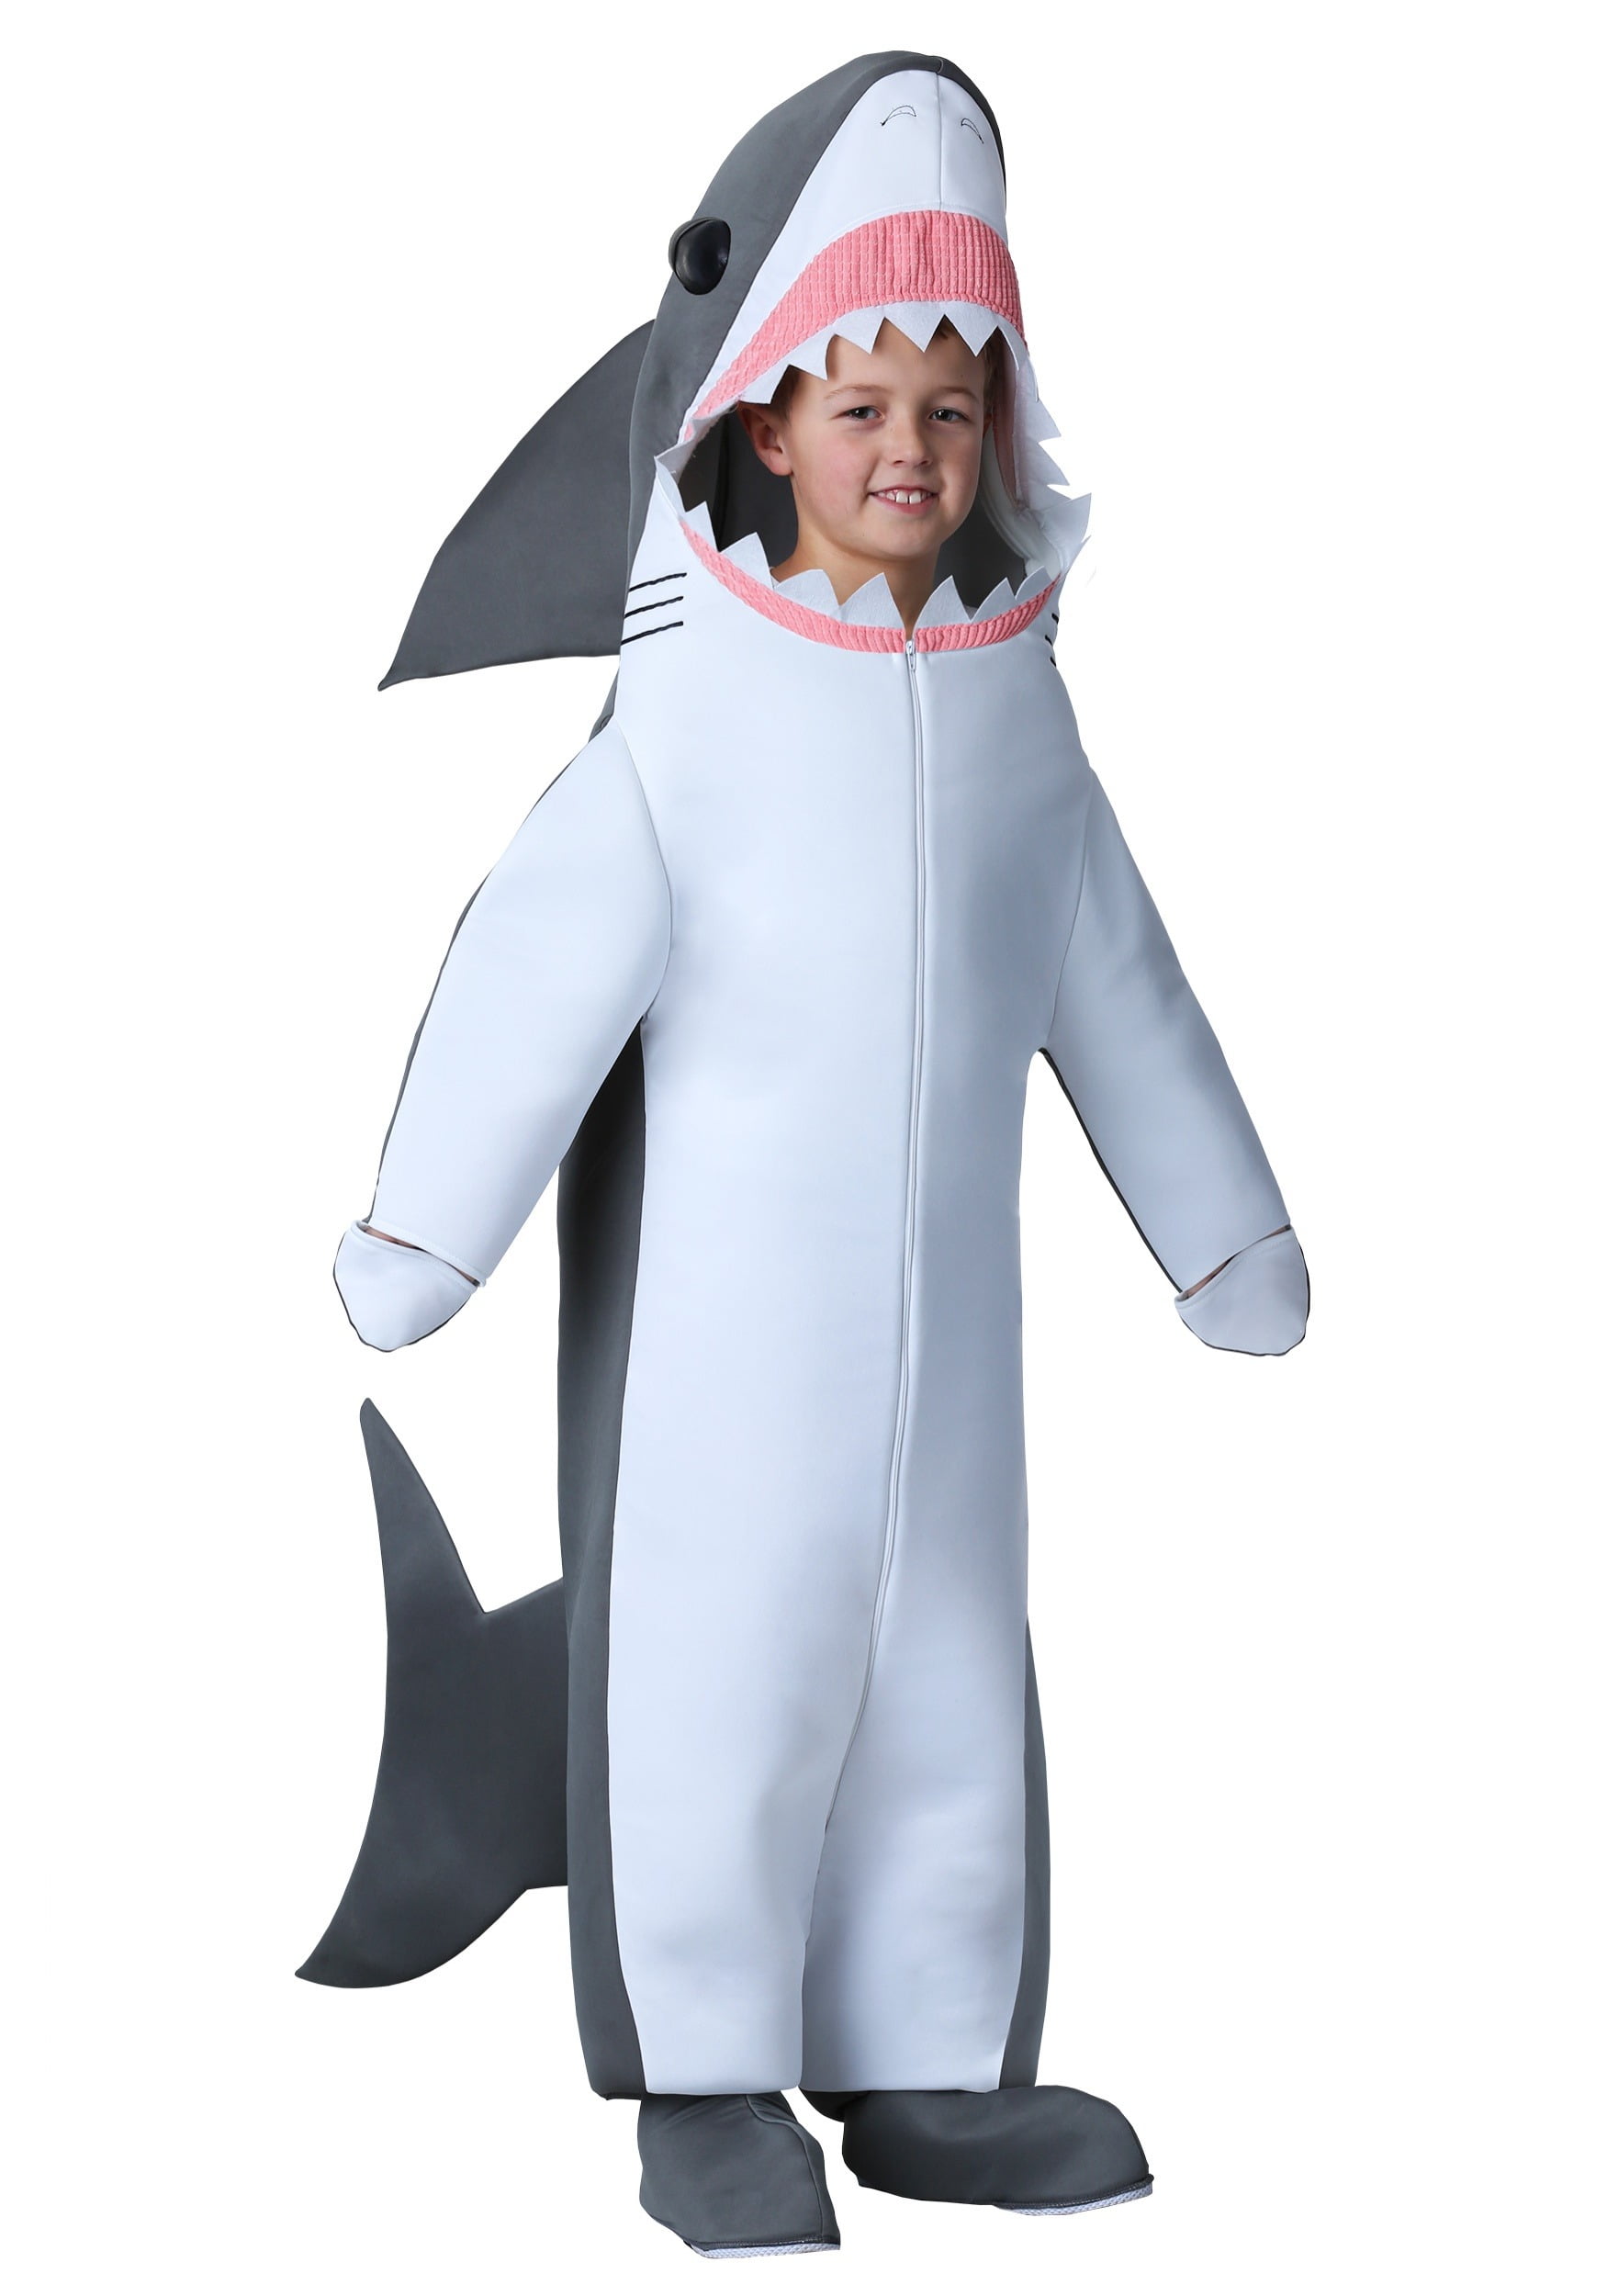 CHILDS SHARK COSTUME JAWS JUMPSUIT BOYS GIRLS ANIMAL BOOK DAY FANCY DRESS OUTFIT 